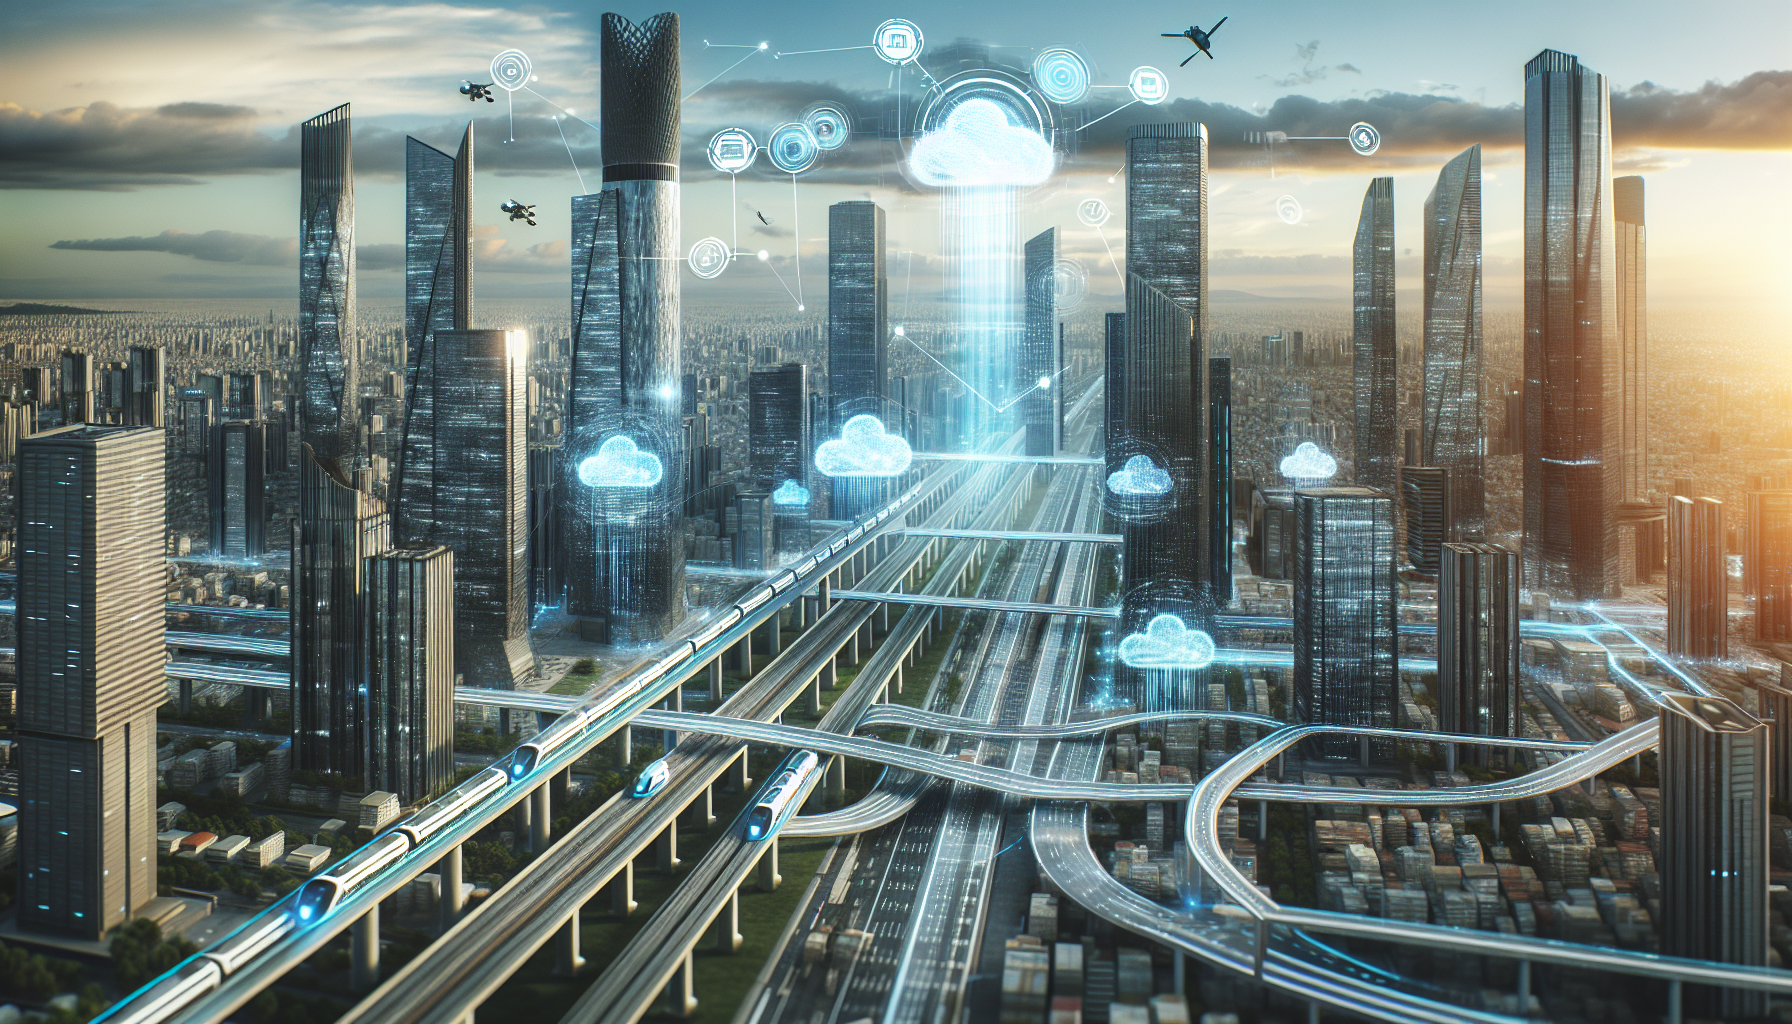 Illustration of a futuristic city skyline representing emerging technologies and cloud computing